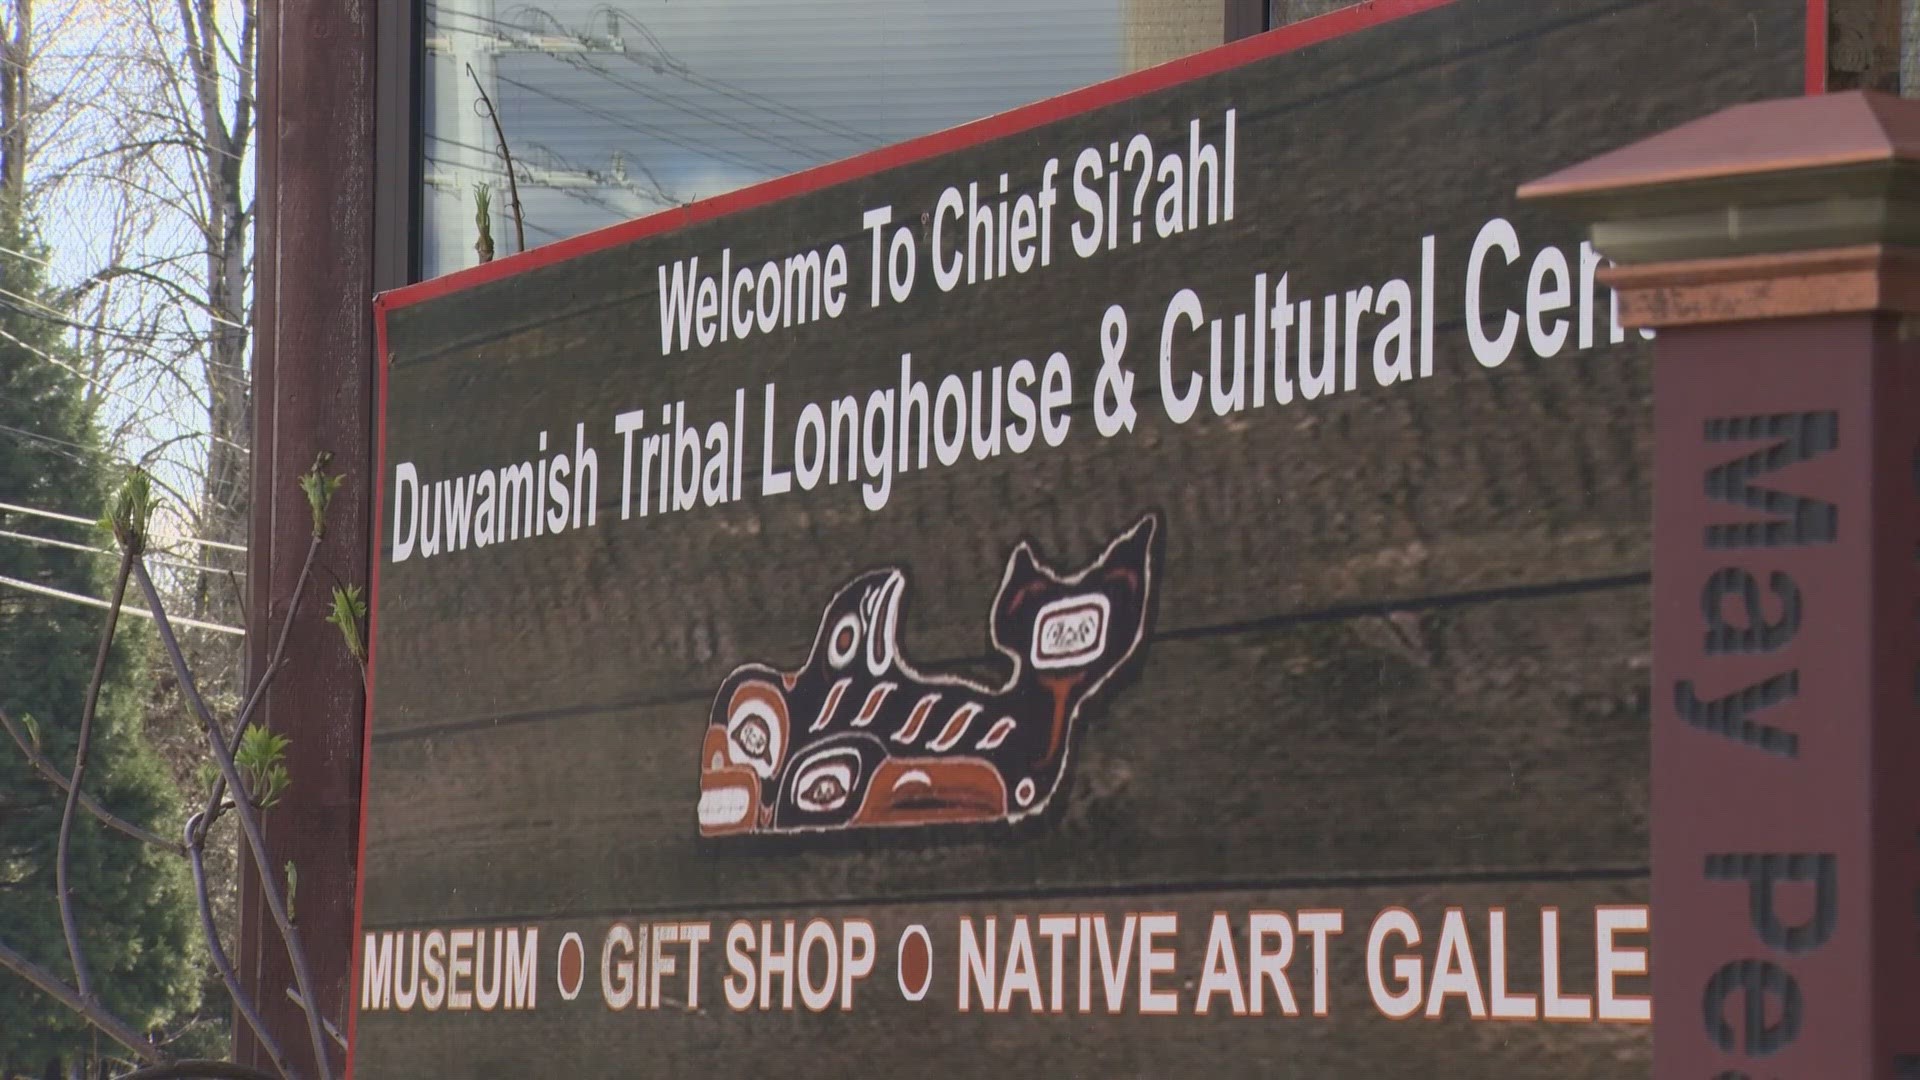 Members spoke at a council committee meeting Tuesday, focusing in on an art project planned with two other tribes.